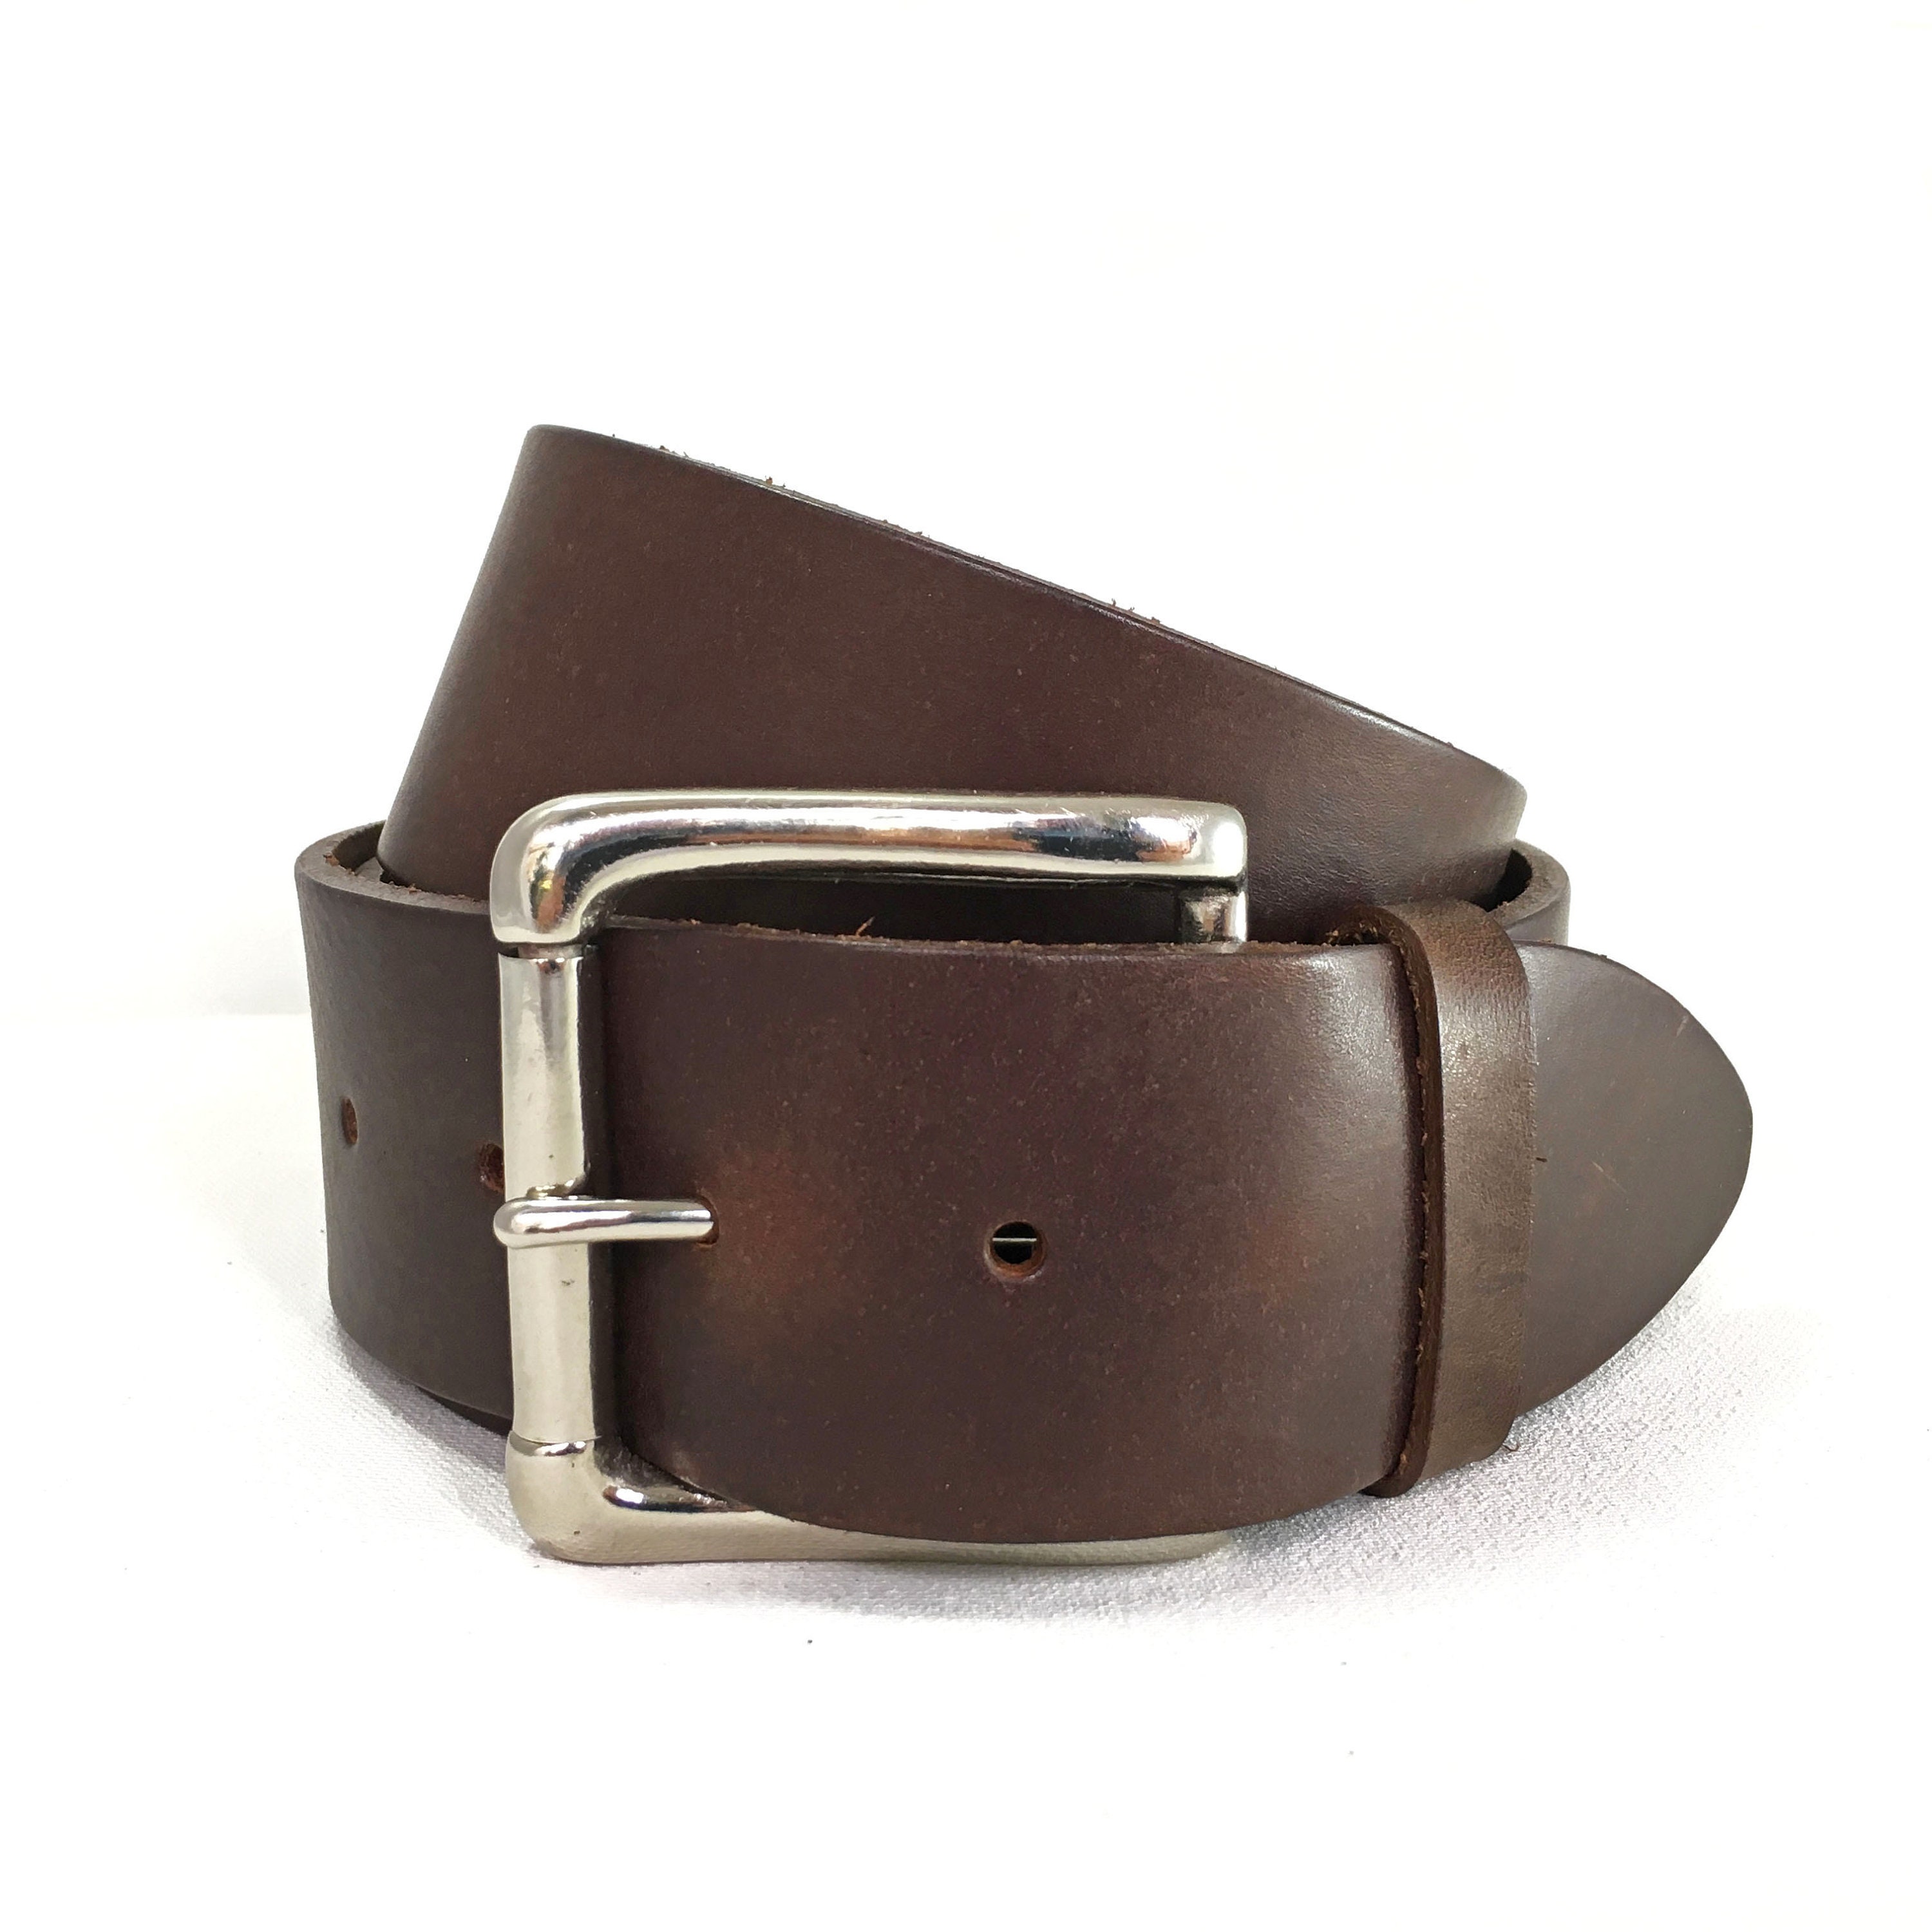 Accessories Belts Leather Belts Francesco Biasia Leather Belt petrol-silver-colored casual look 